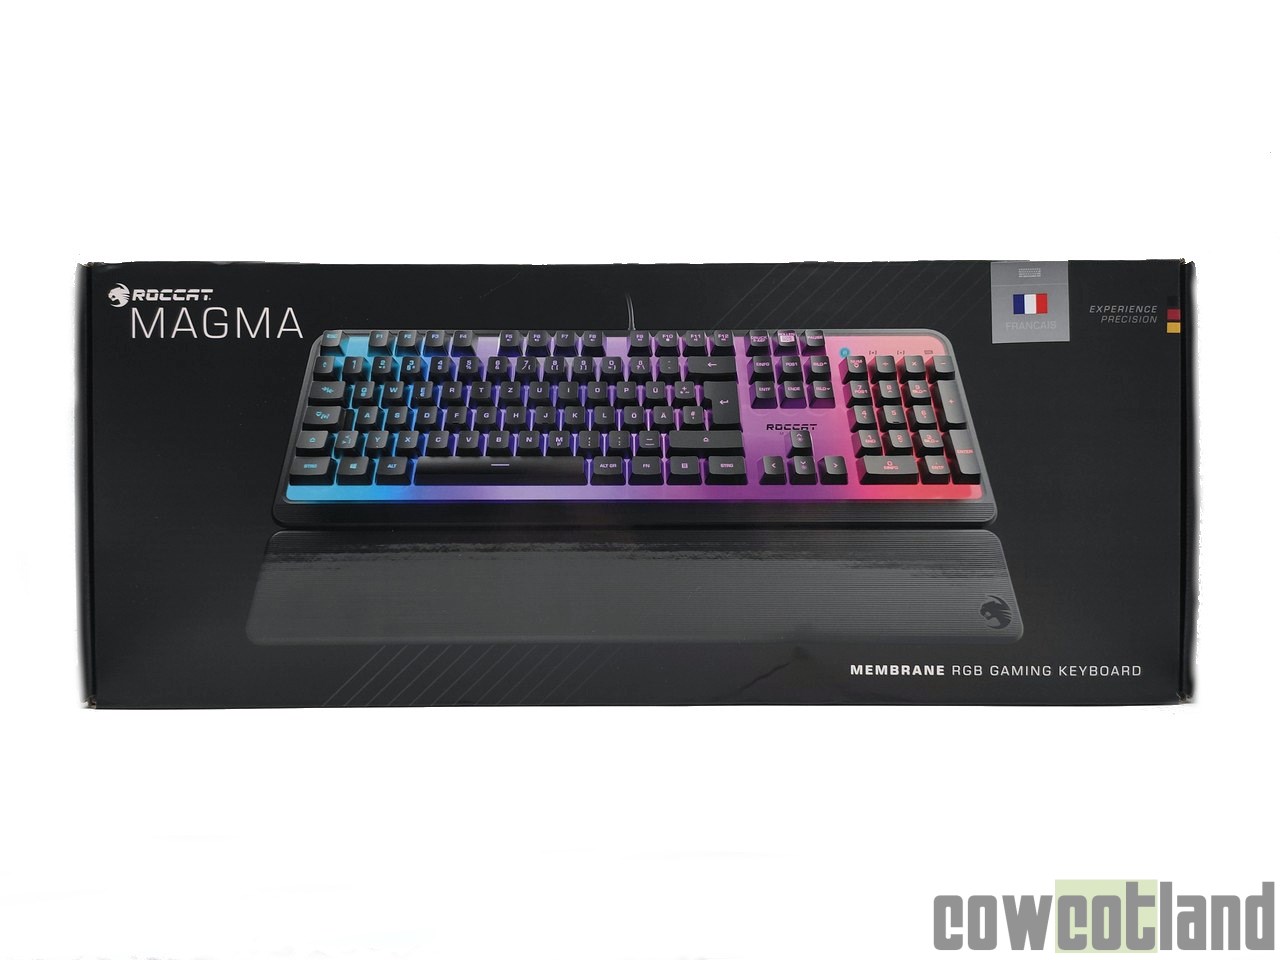 Image 45358, galerie Test clavier ROCCAT Magma, King of the RGB !